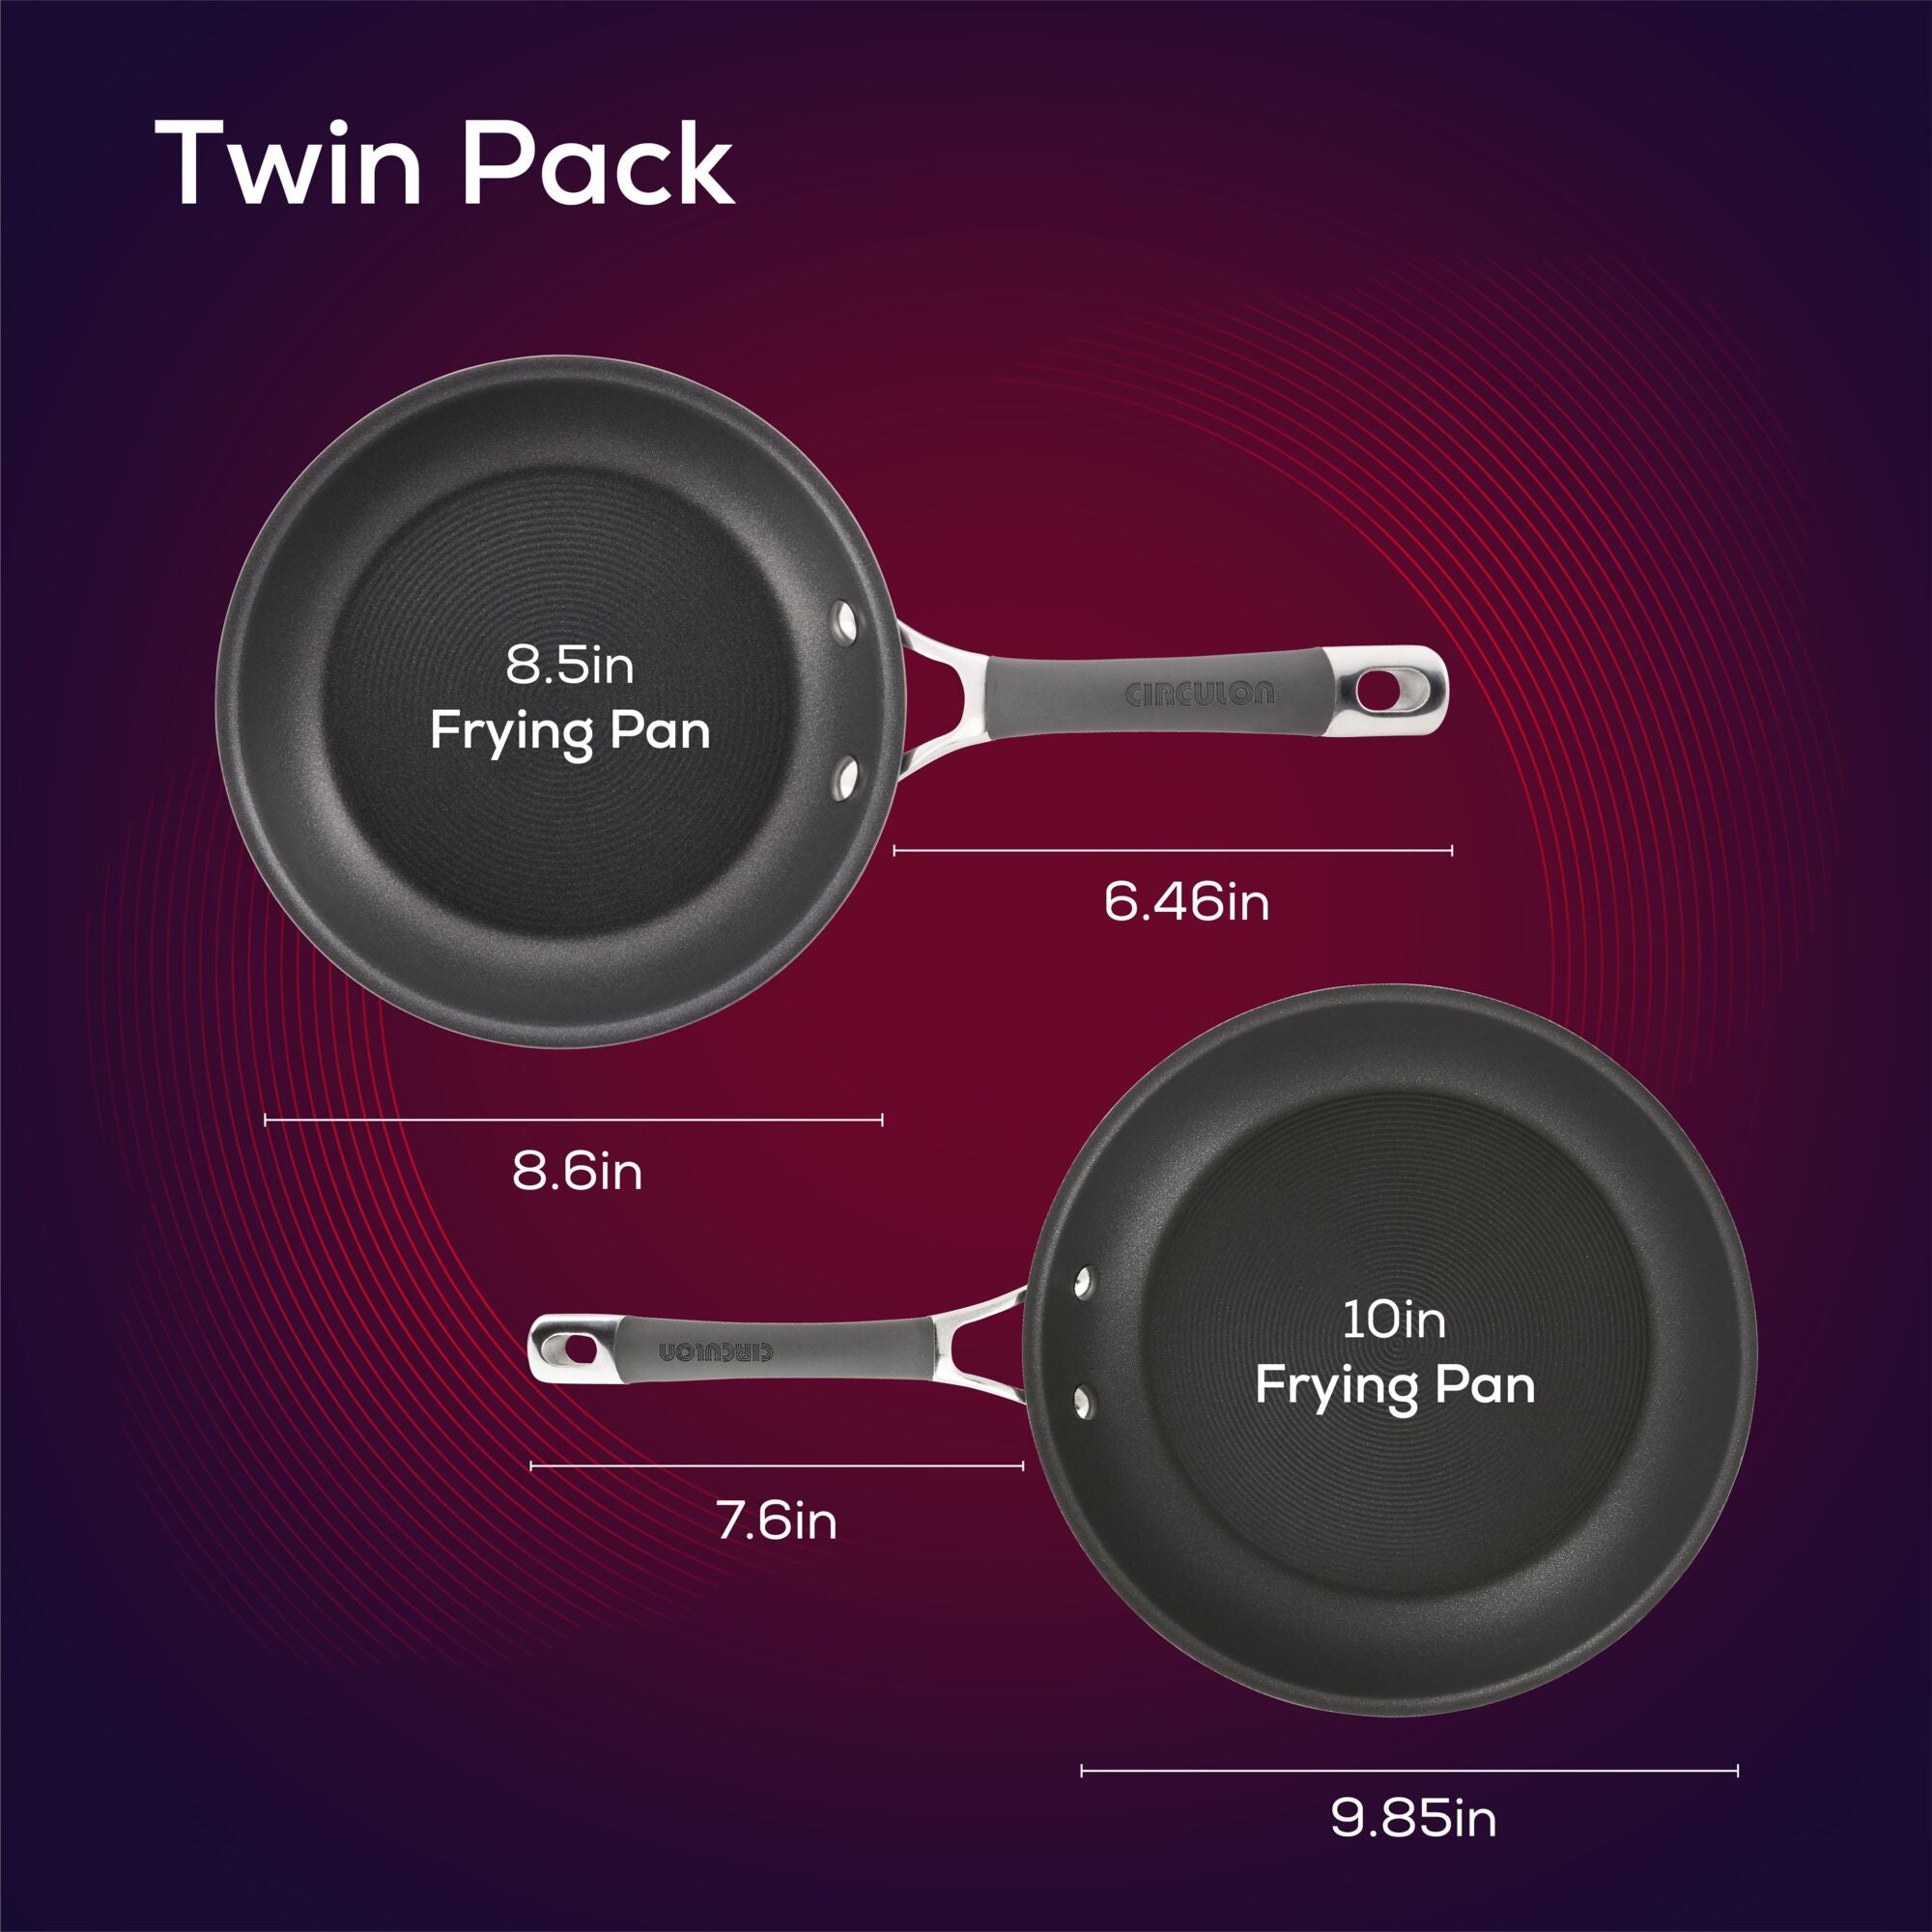 Square Shallow Fry Pans, Non-Stick Surface, 2-Pc. Set, As Seen On